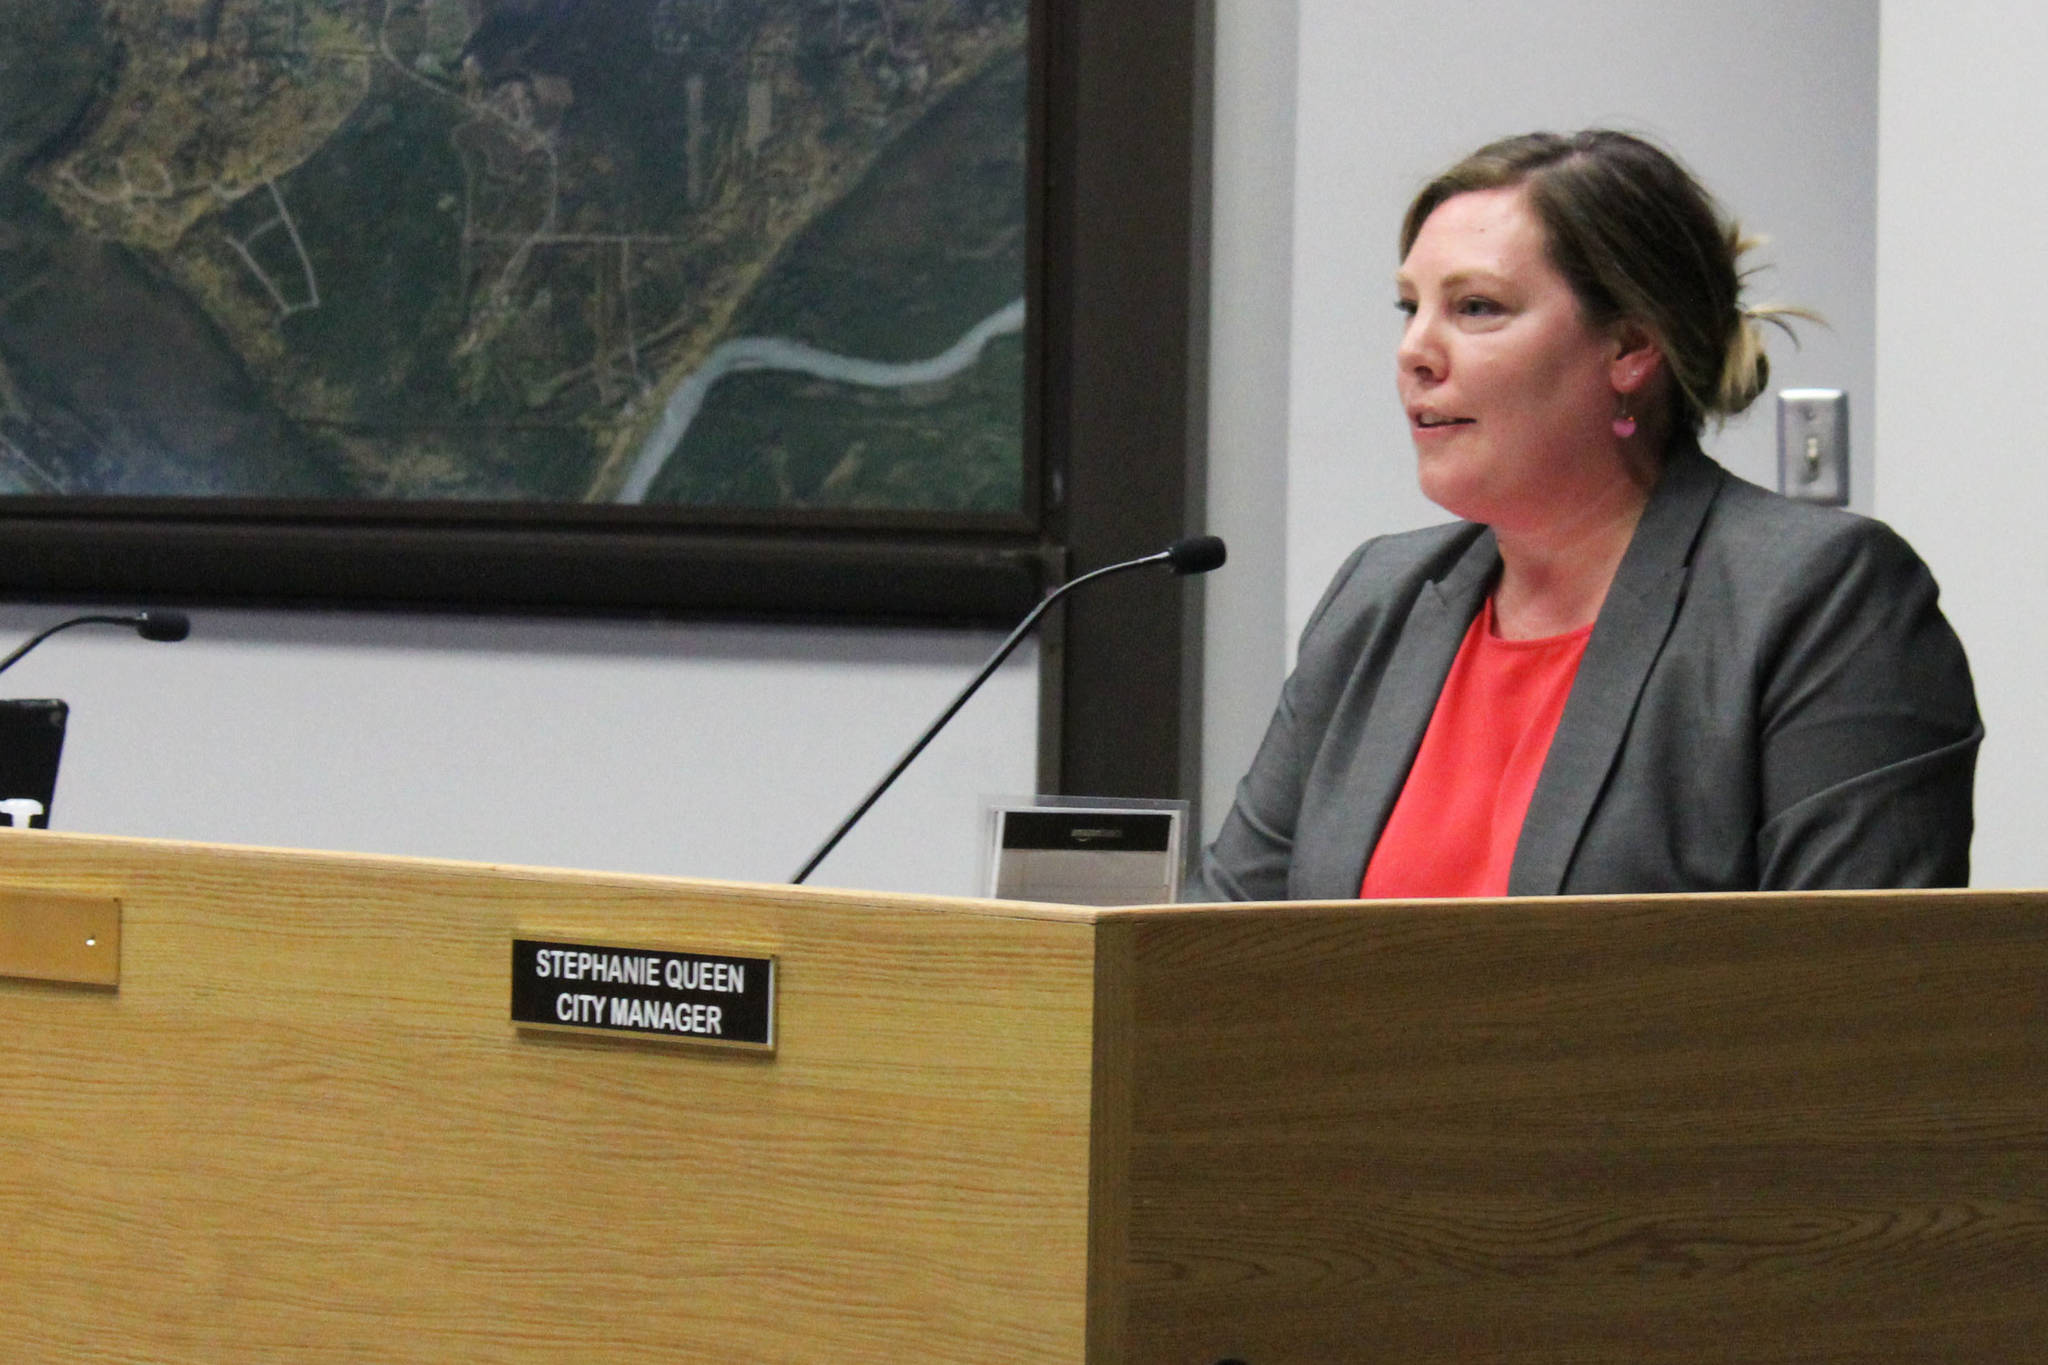 Soldotna City Manager Stephanie Queen speaks at a meeting of the Sodotna City Council on Wednesday, June 23, 2021 in Soldotna, Alaska. (Ashlyn O’Hara/Peninsula Clarion)